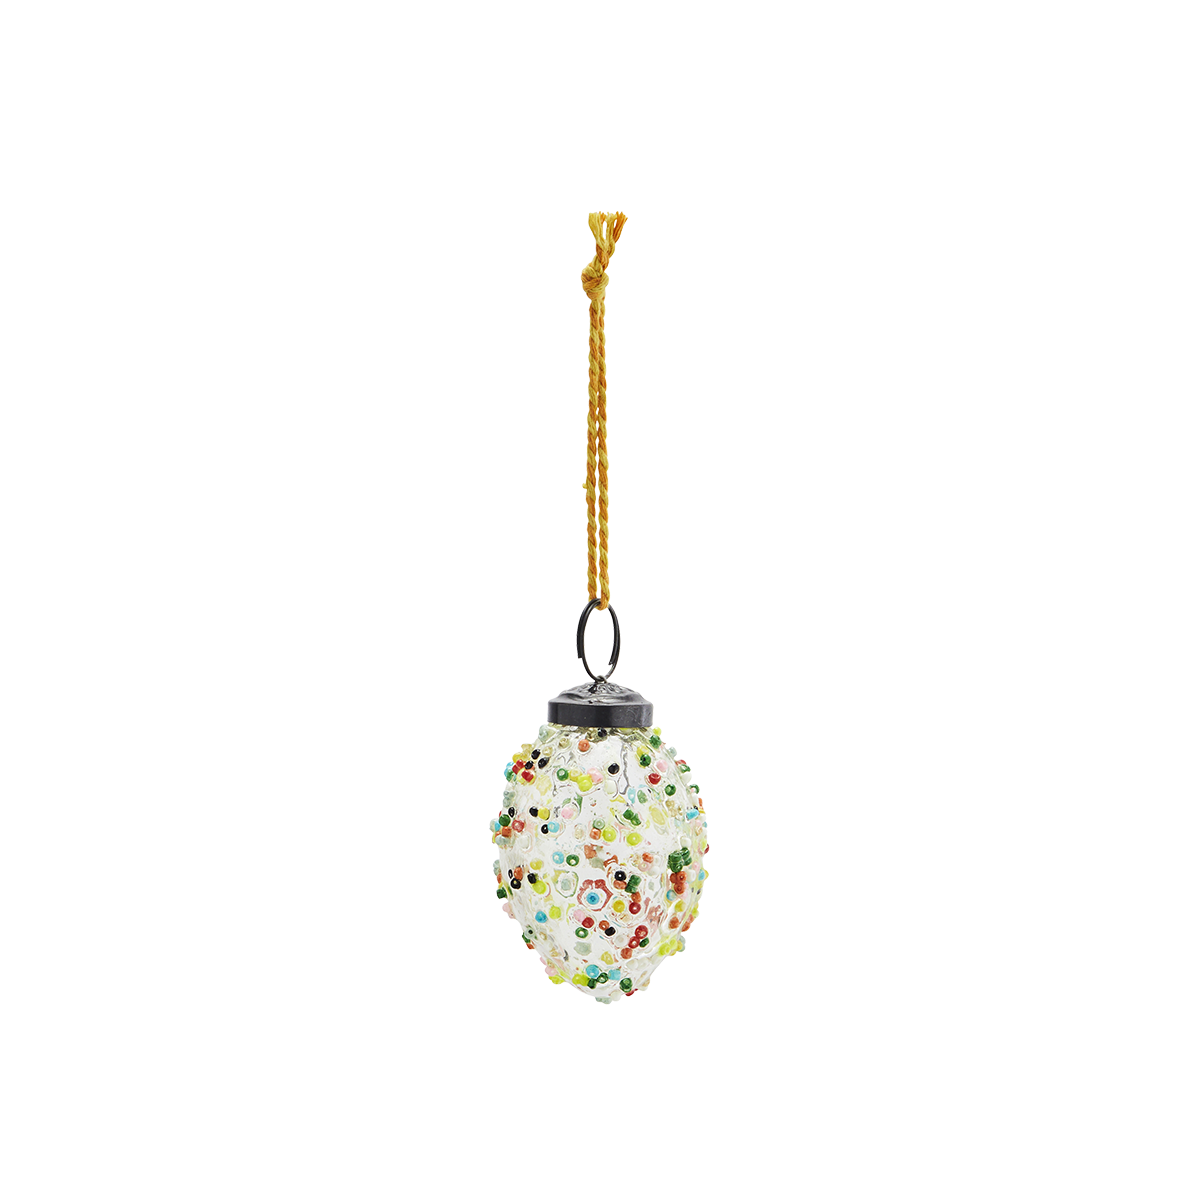 Hanging easter egg w/ beads